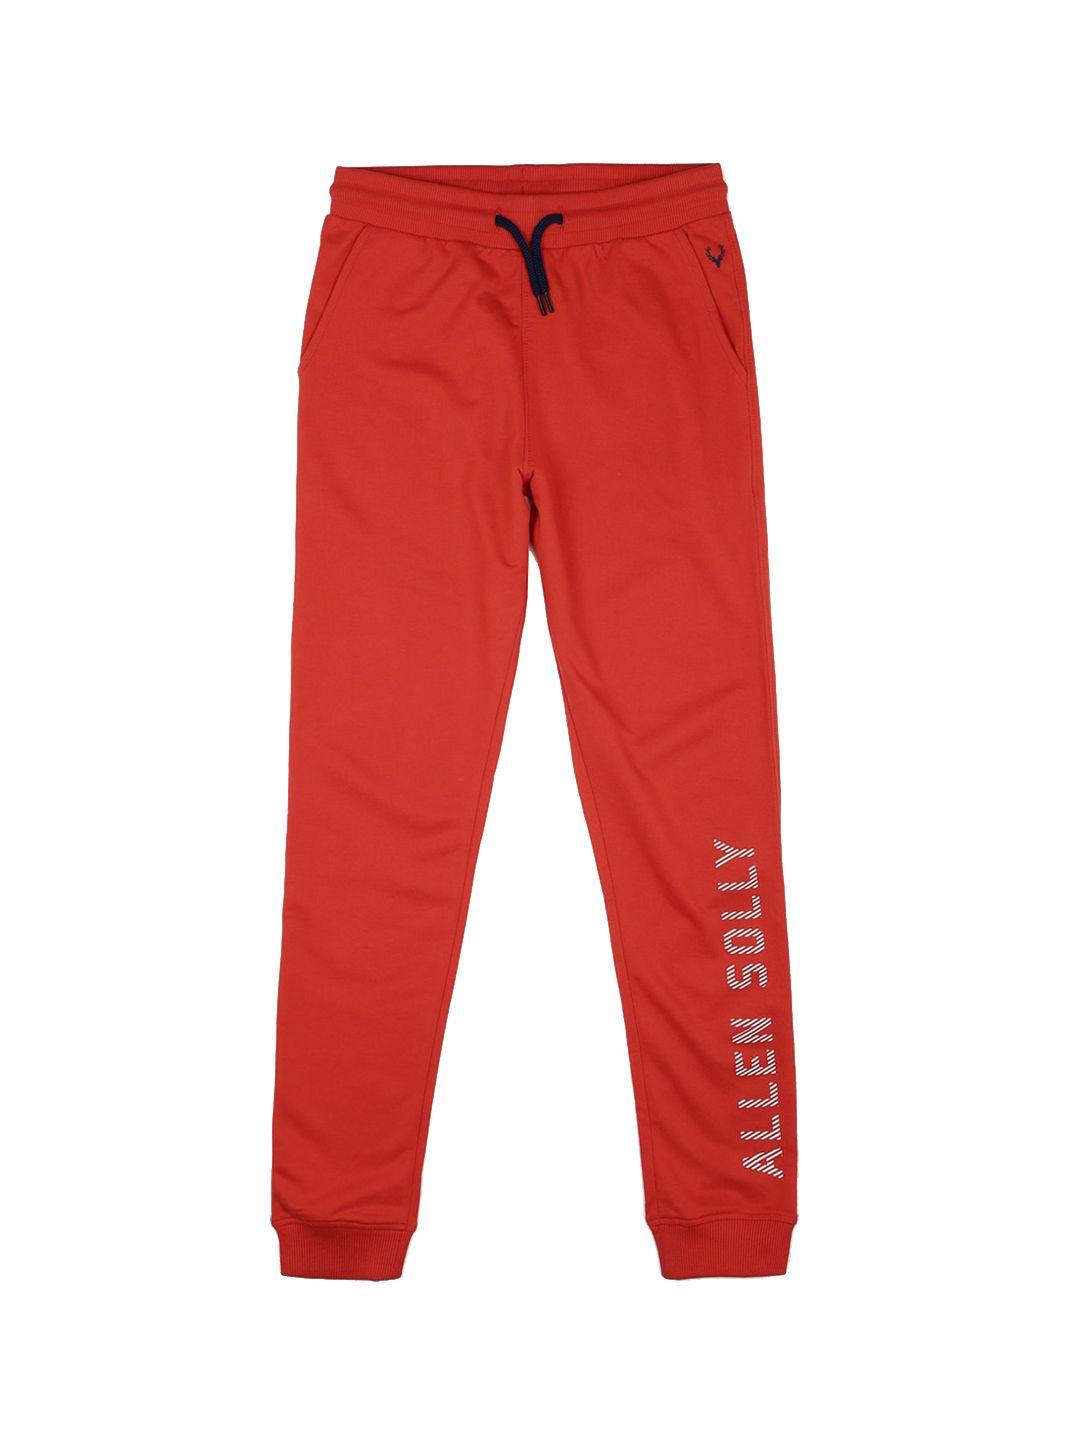 allen-solly-junior-boys-red-&-white-regular-fit-printed-joggers